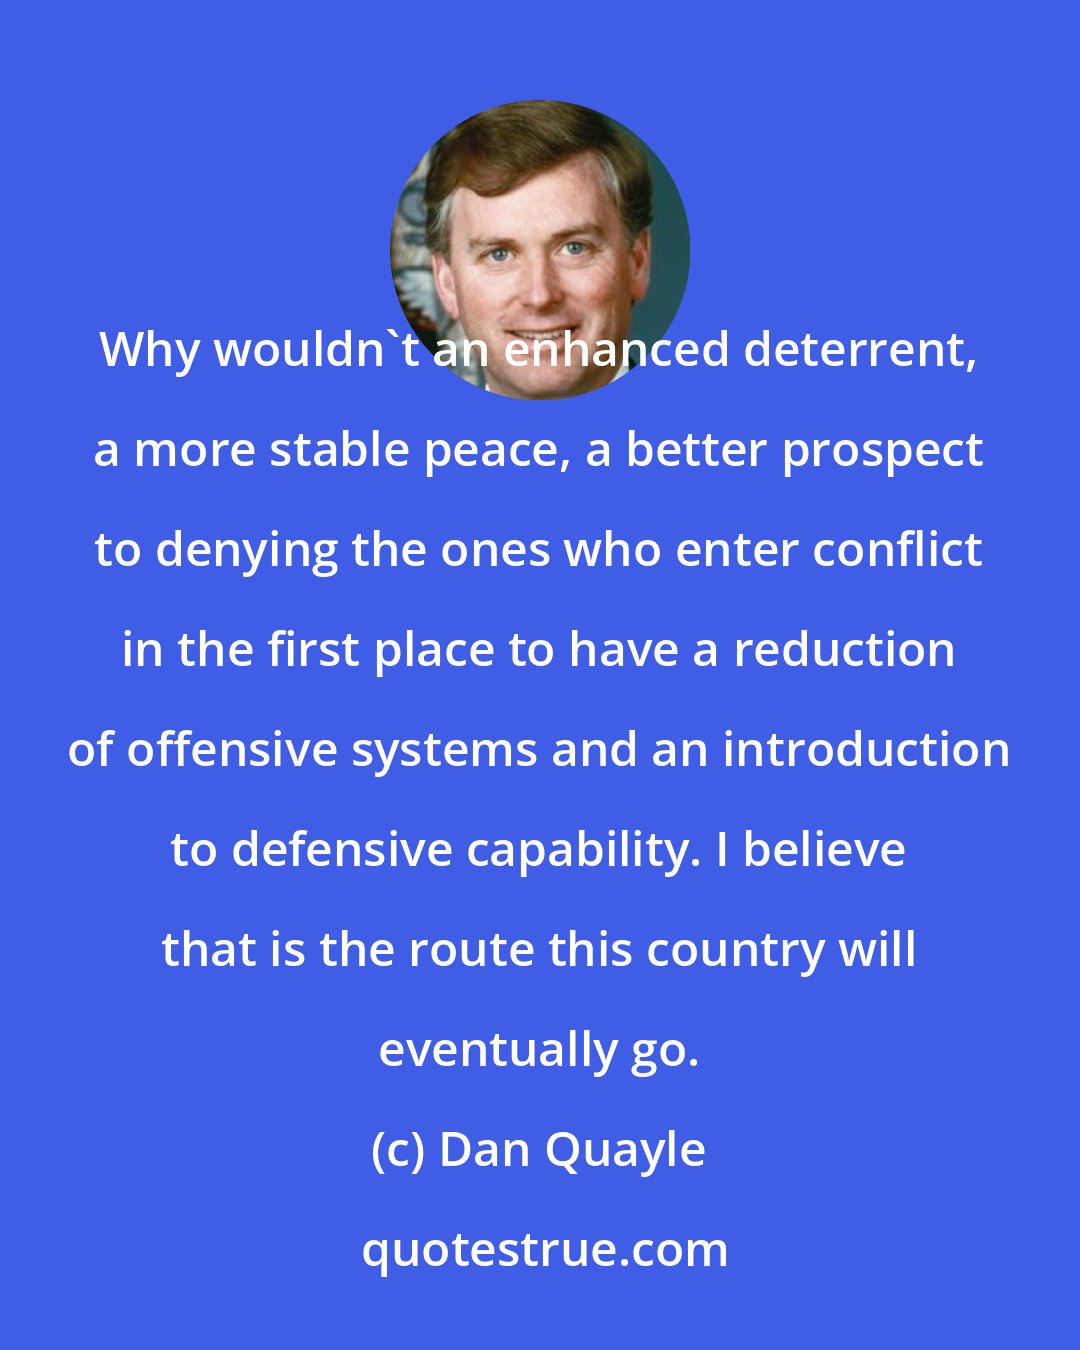 Dan Quayle: Why wouldn't an enhanced deterrent, a more stable peace, a better prospect to denying the ones who enter conflict in the first place to have a reduction of offensive systems and an introduction to defensive capability. I believe that is the route this country will eventually go.